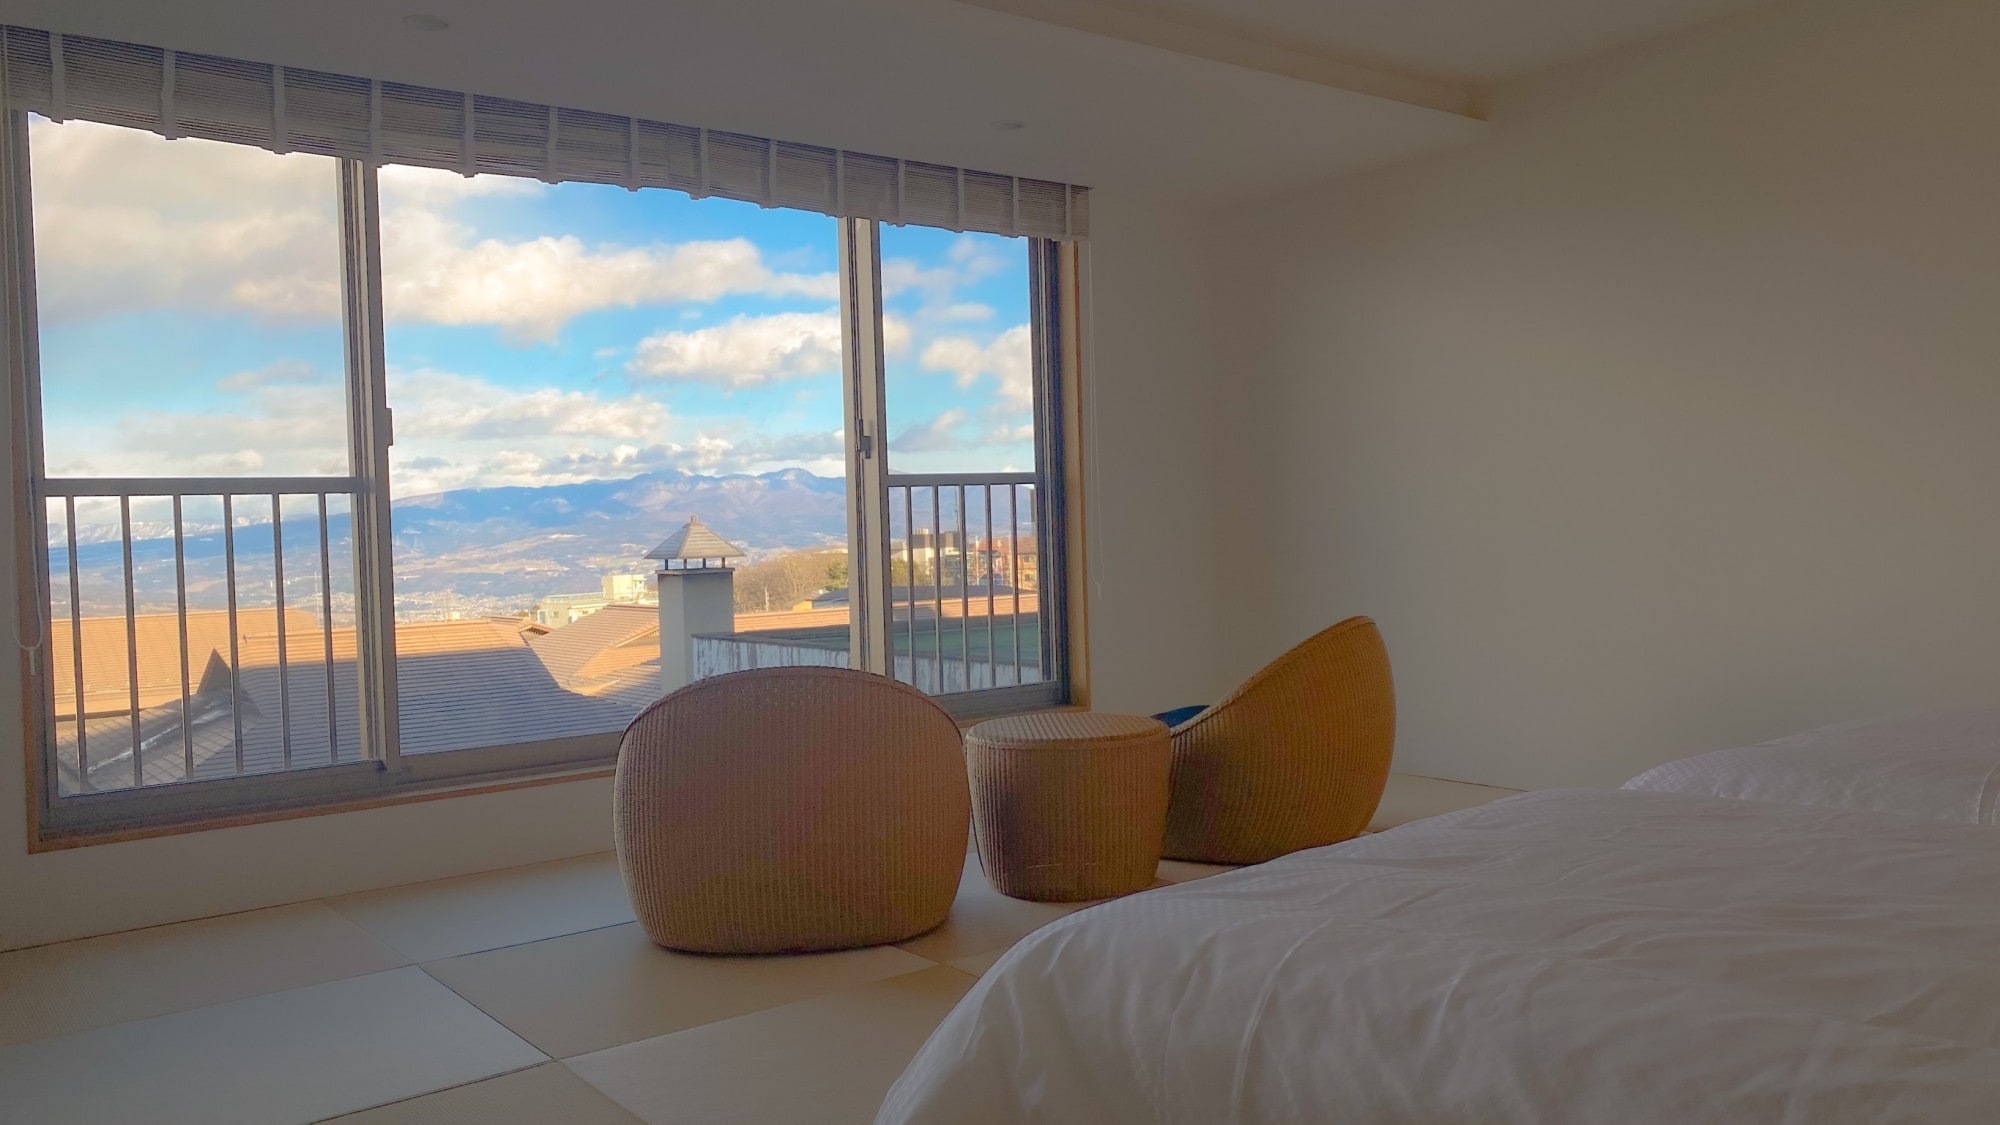 New guest room with bed that emphasizes the view, evening view